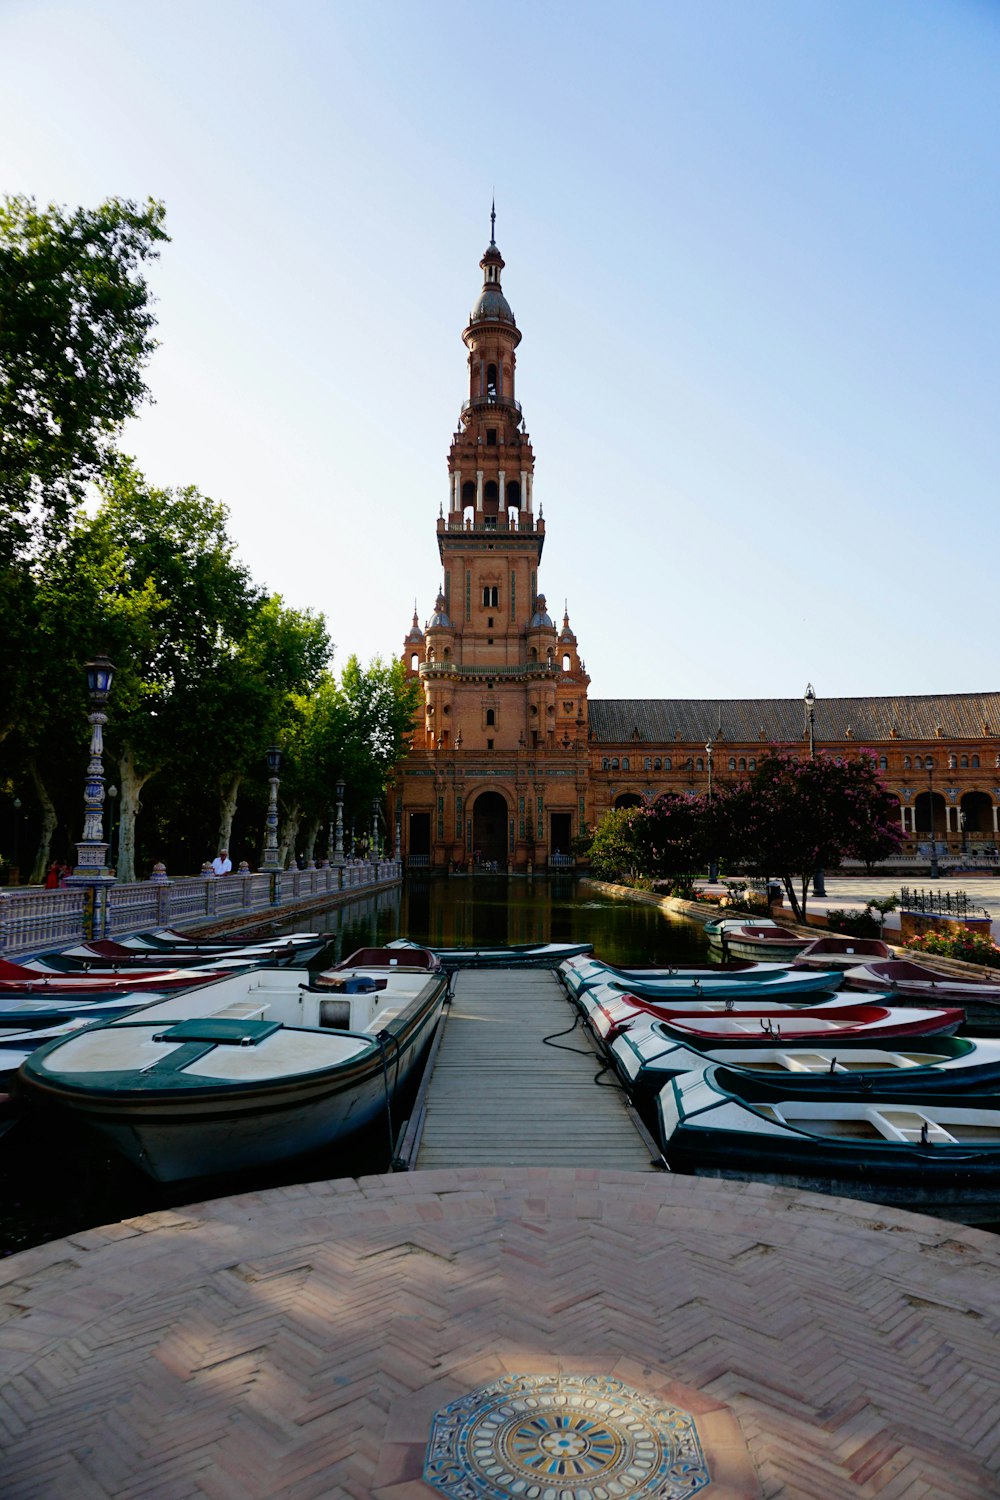 a building with a tower and boats in front of it